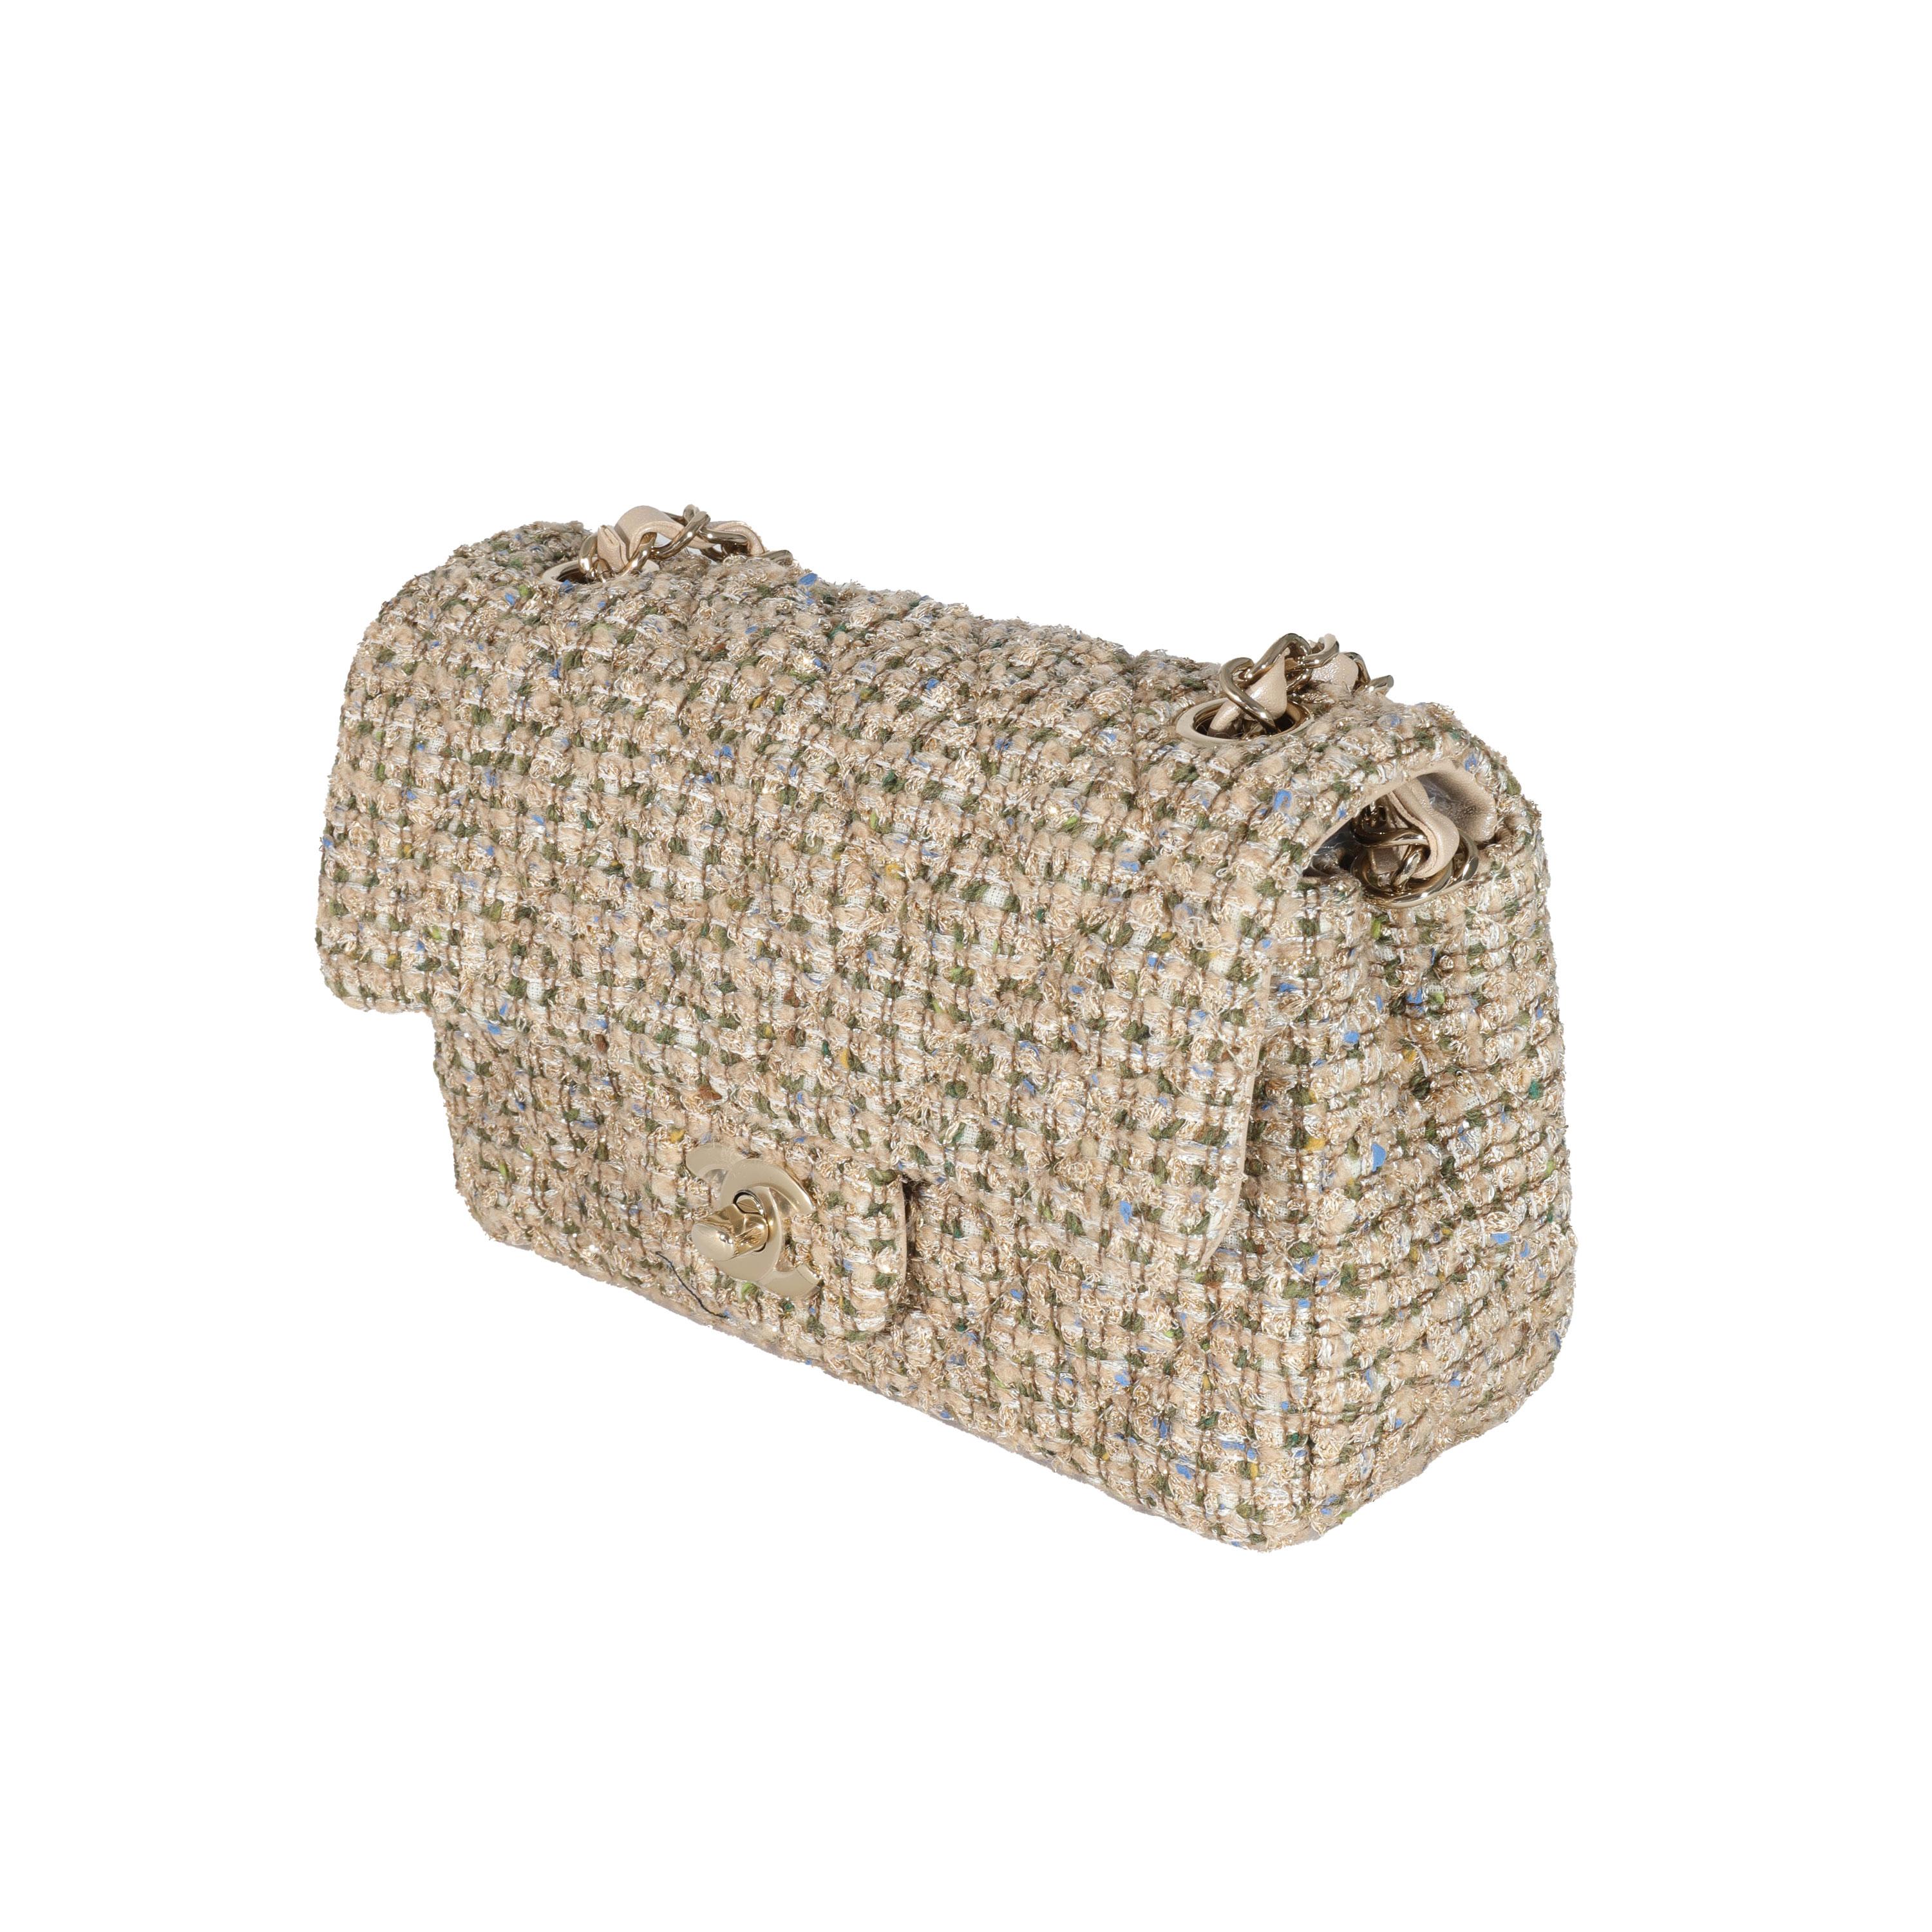 Listing Title: Chanel 21A Gold Tweed Mini Rectangular Flap Bag
SKU: 131579
Condition: Pre-owned 
Condition Description: A timeless classic that never goes out of style, the flap bag from Chanel dates back to 1955 and has seen a number of updates.